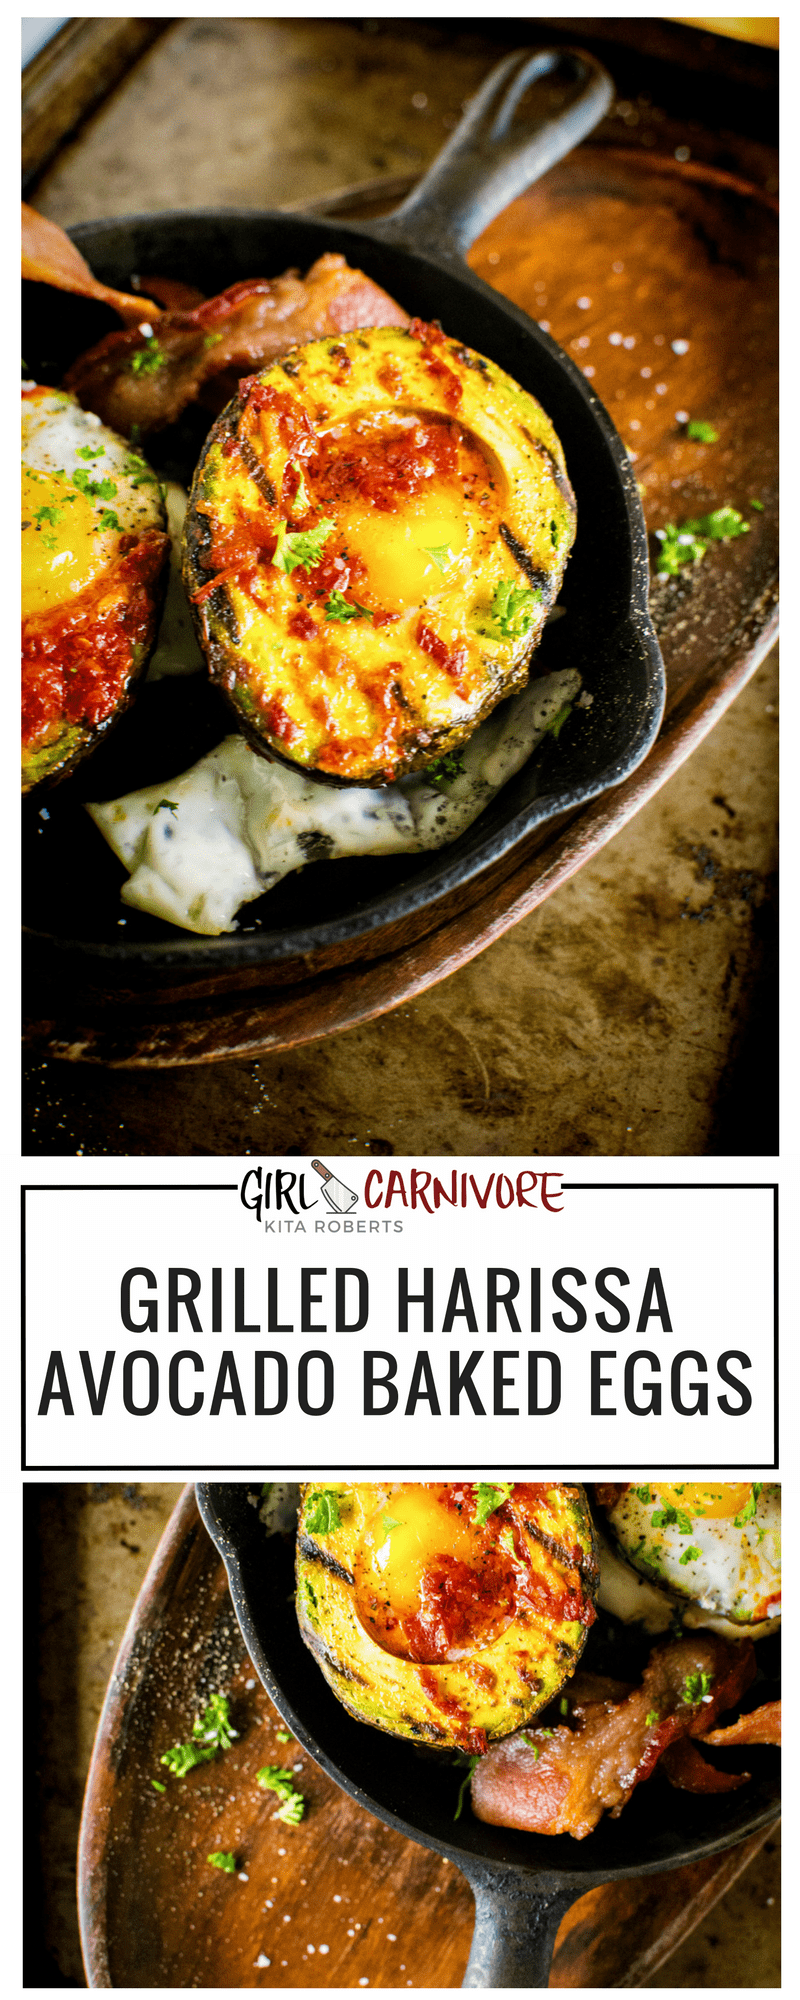 Whole 30 Grilled Harissa Avocado Baked Eggs